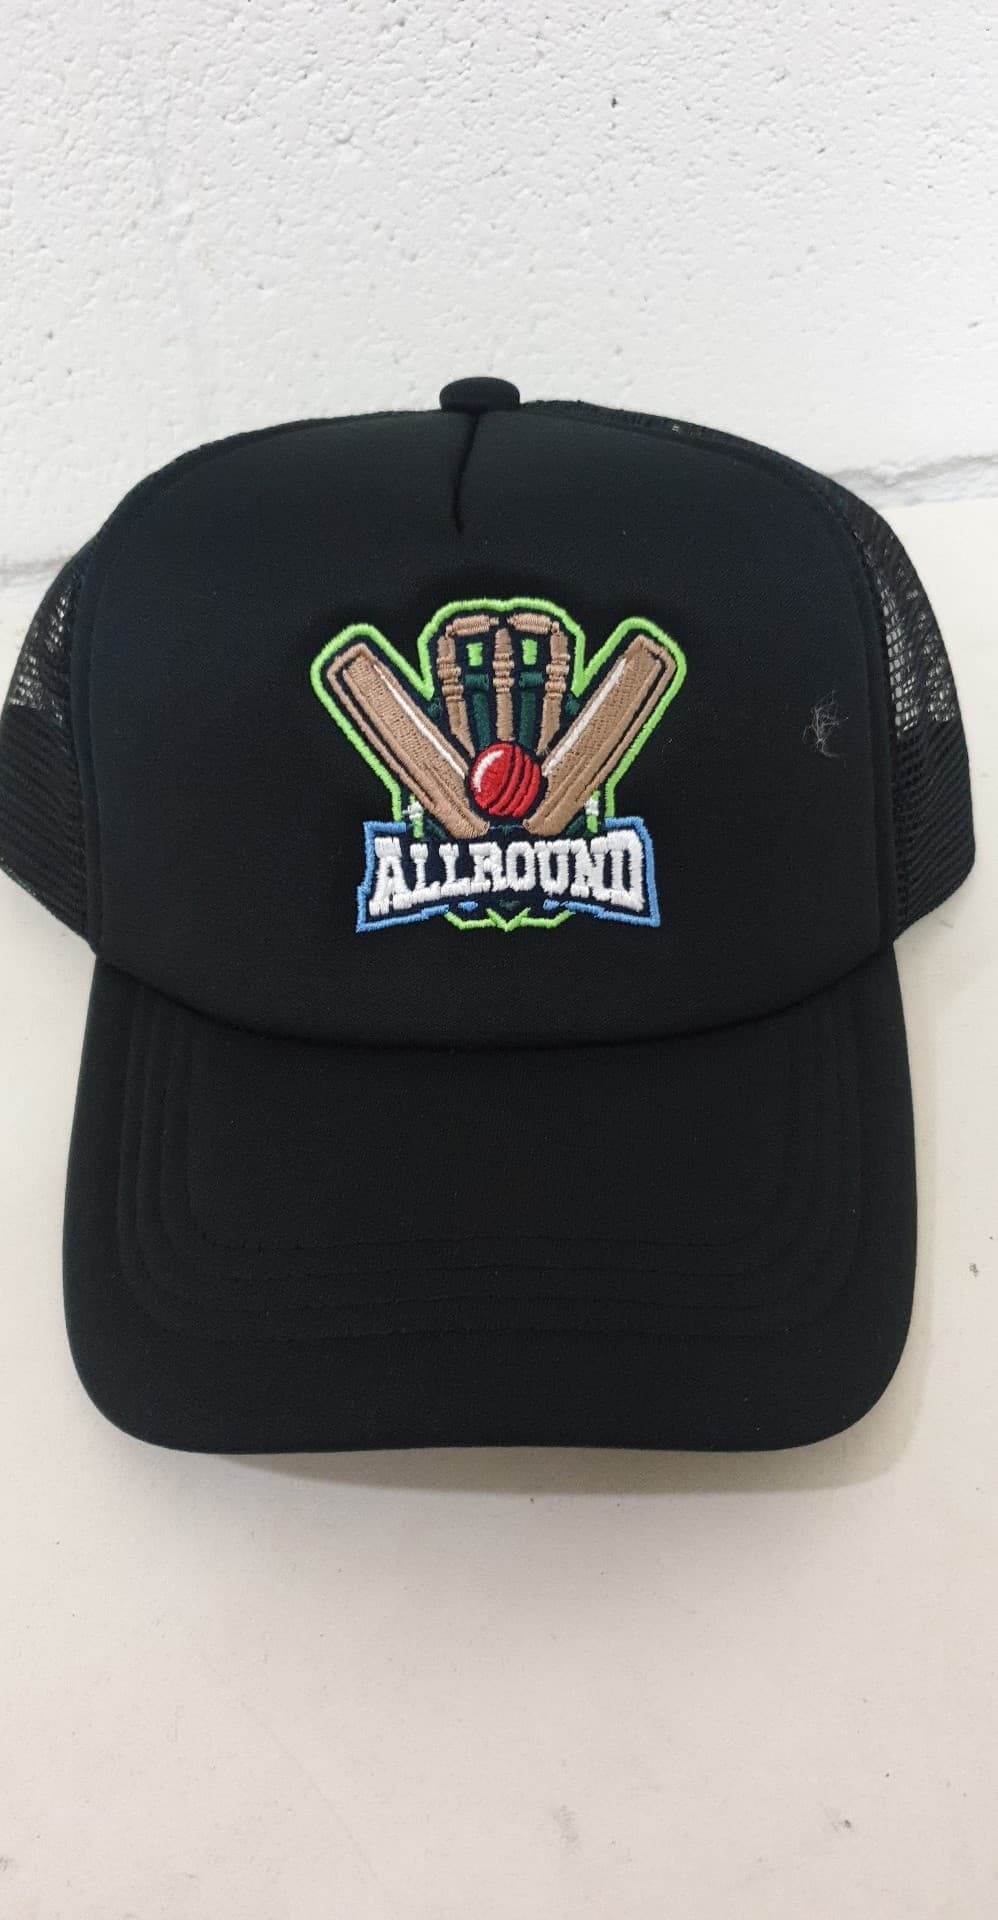 Logo Embroidered on Cap — Sportscoast Trophies & Embroidery in Erina, NSW